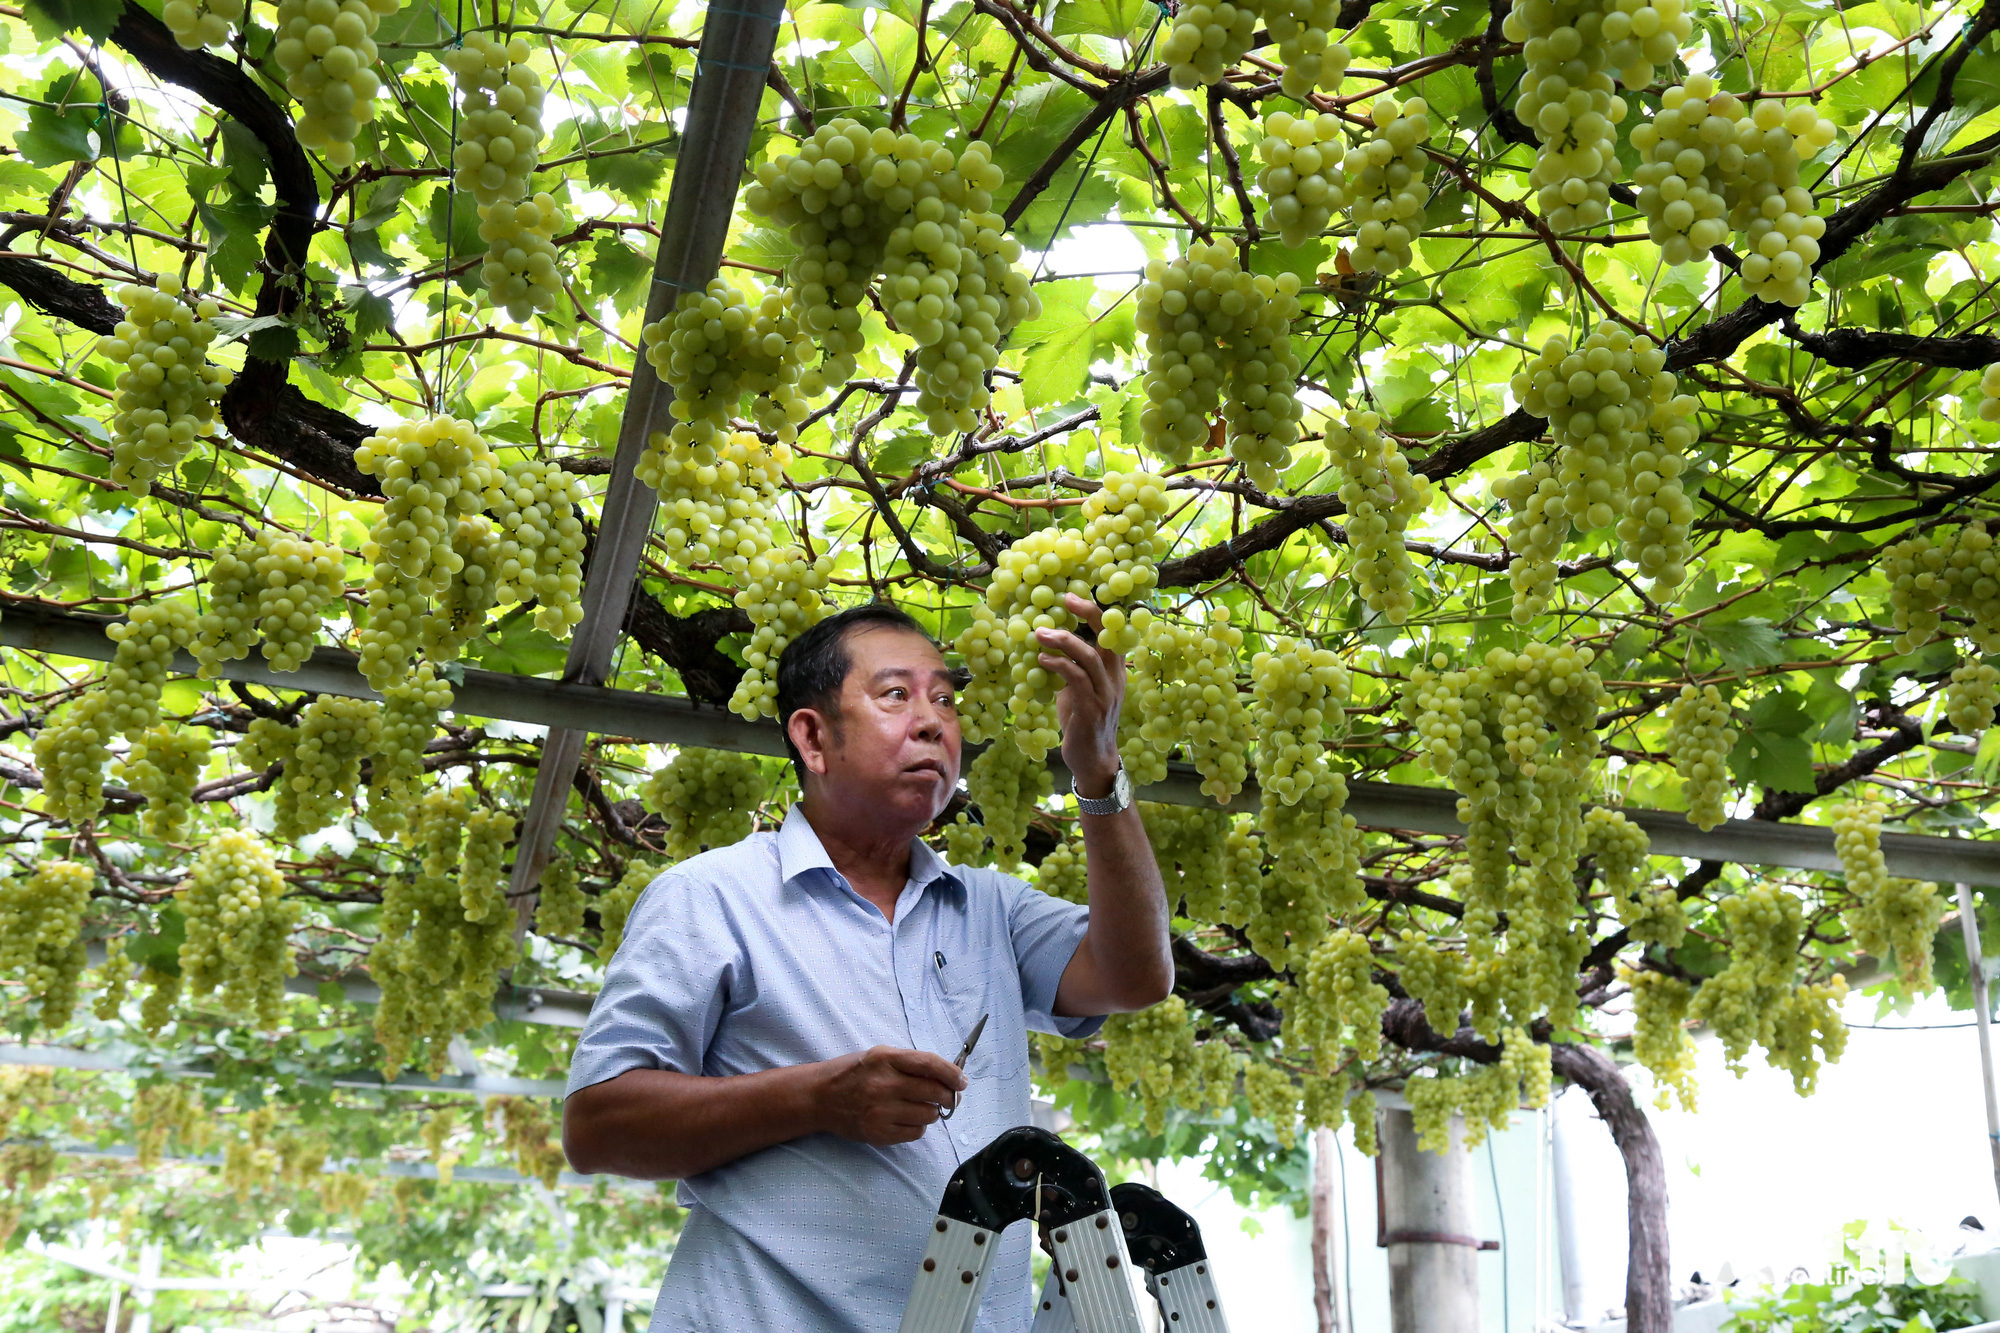 Ho Chi Minh City man’s fruit-laden grapevines inspire home gardening trend